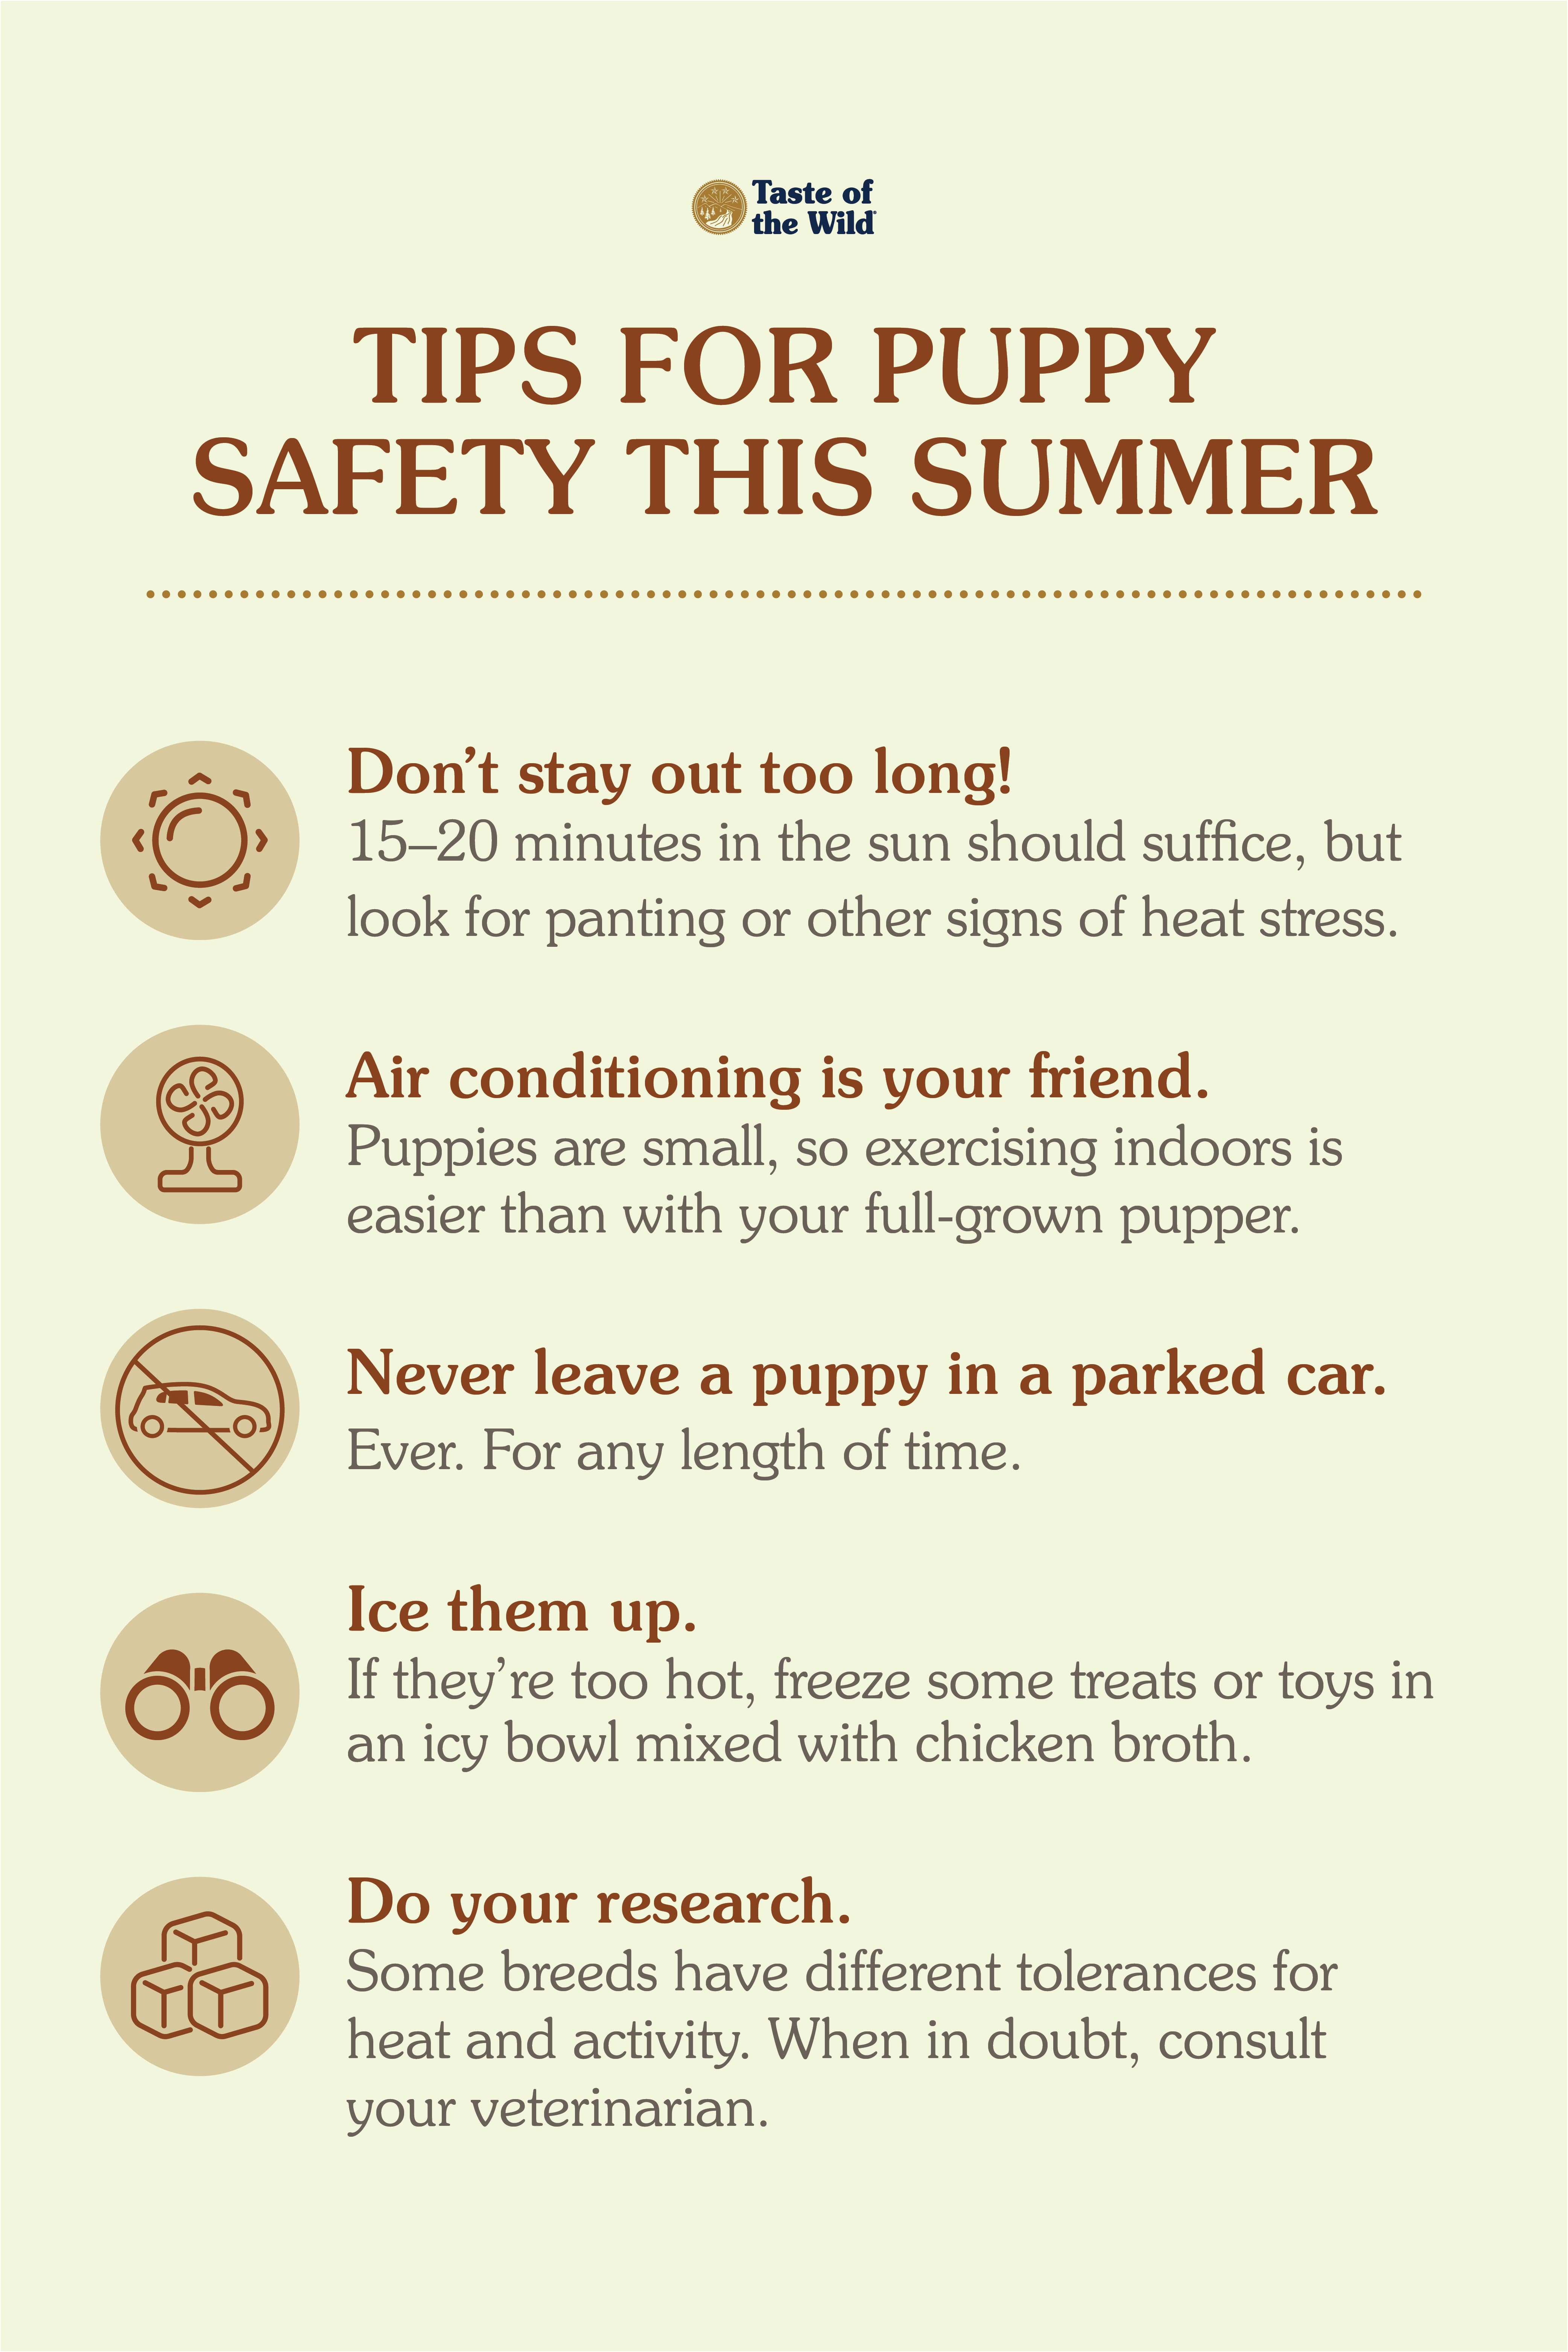 An interior graphic detailing 5 different summer safety tips for puppies.